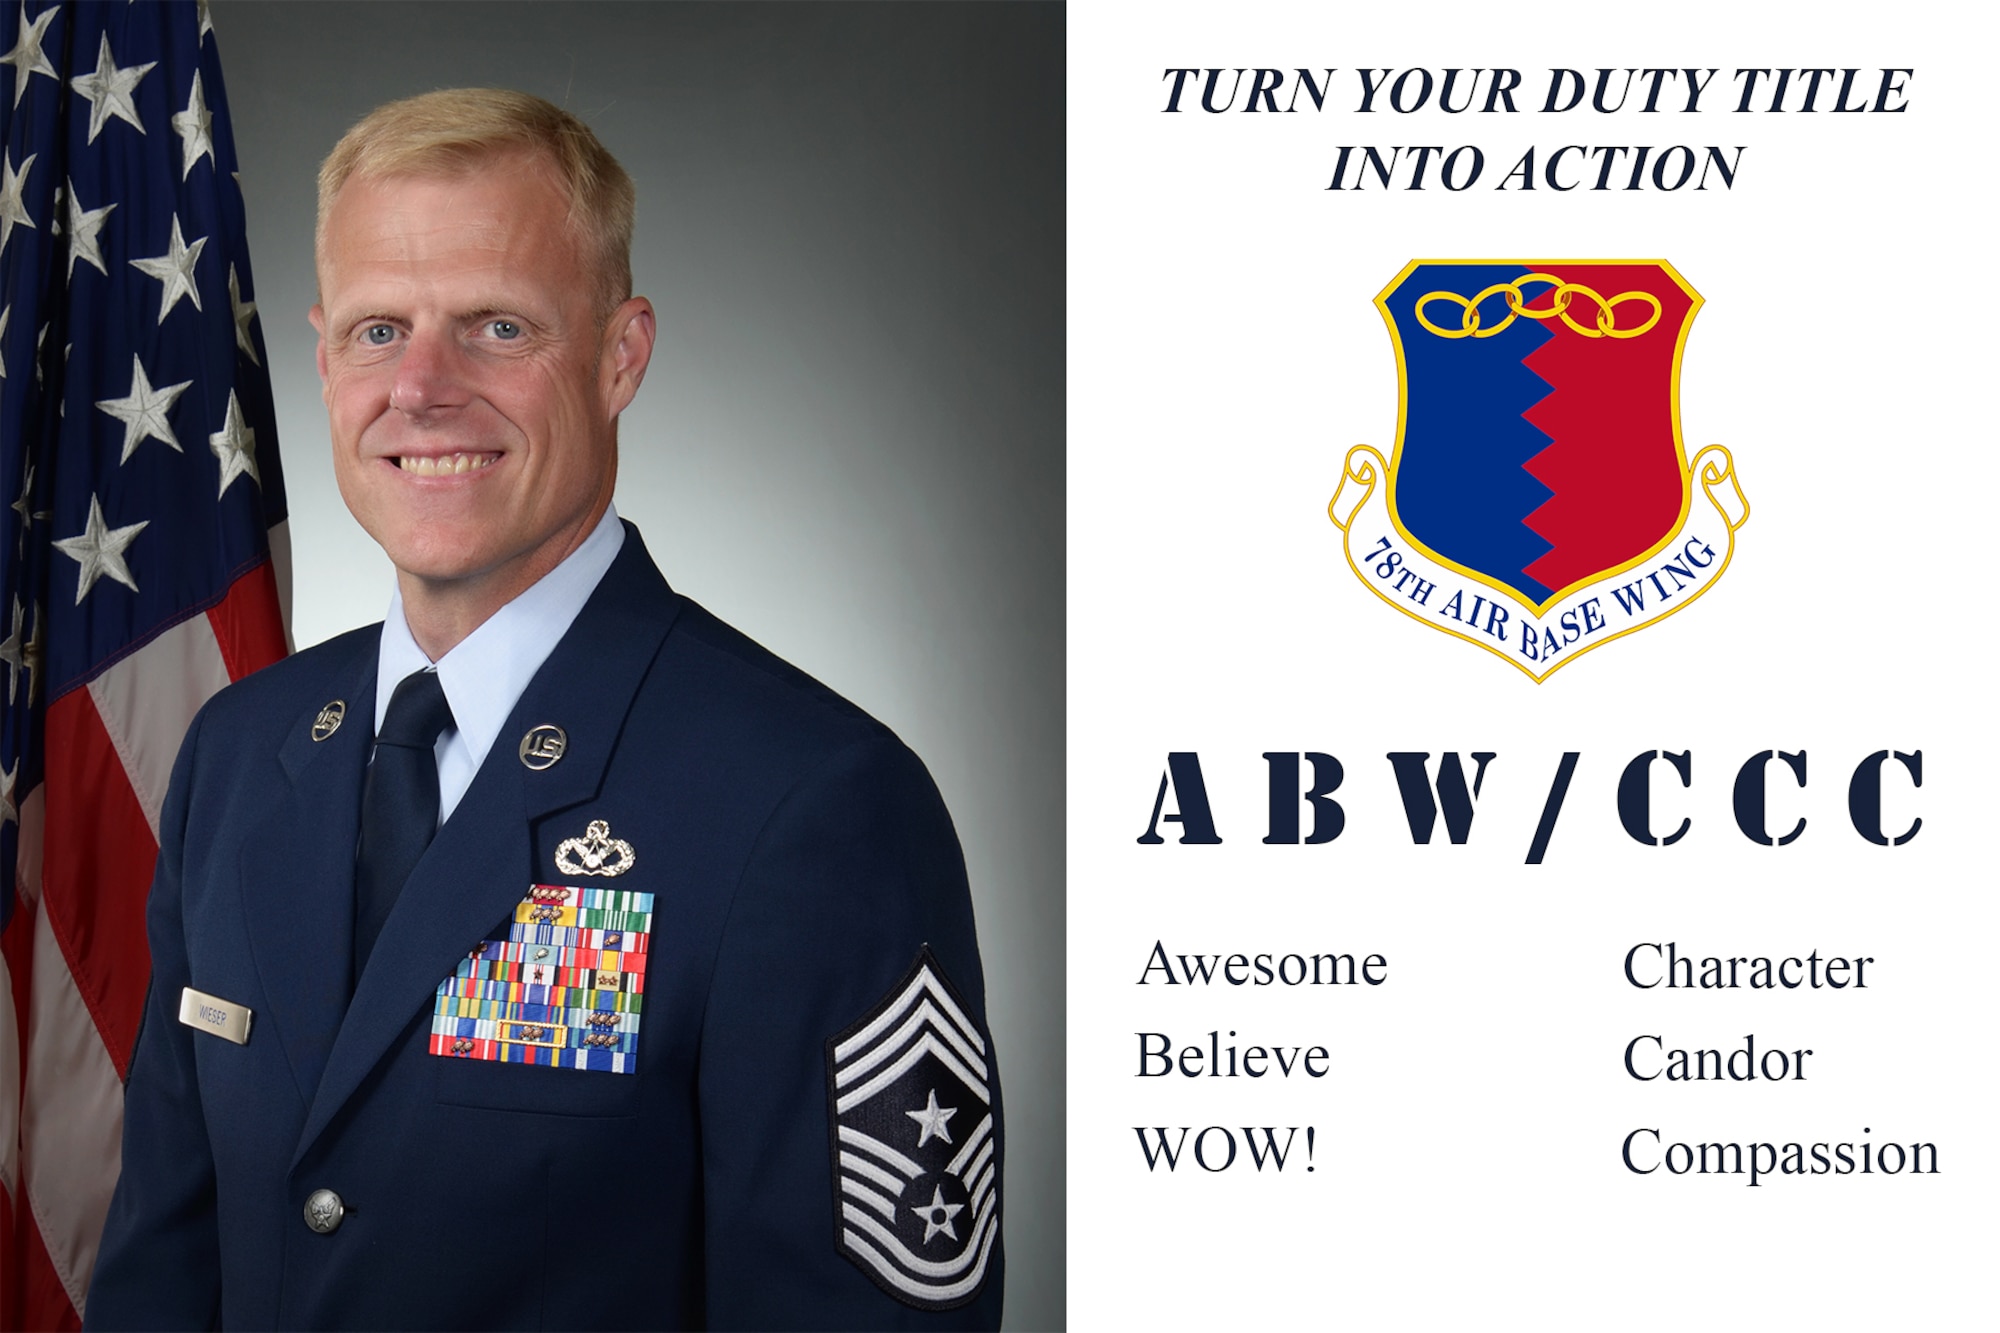 Turn your duty title into action: ABW/CCC